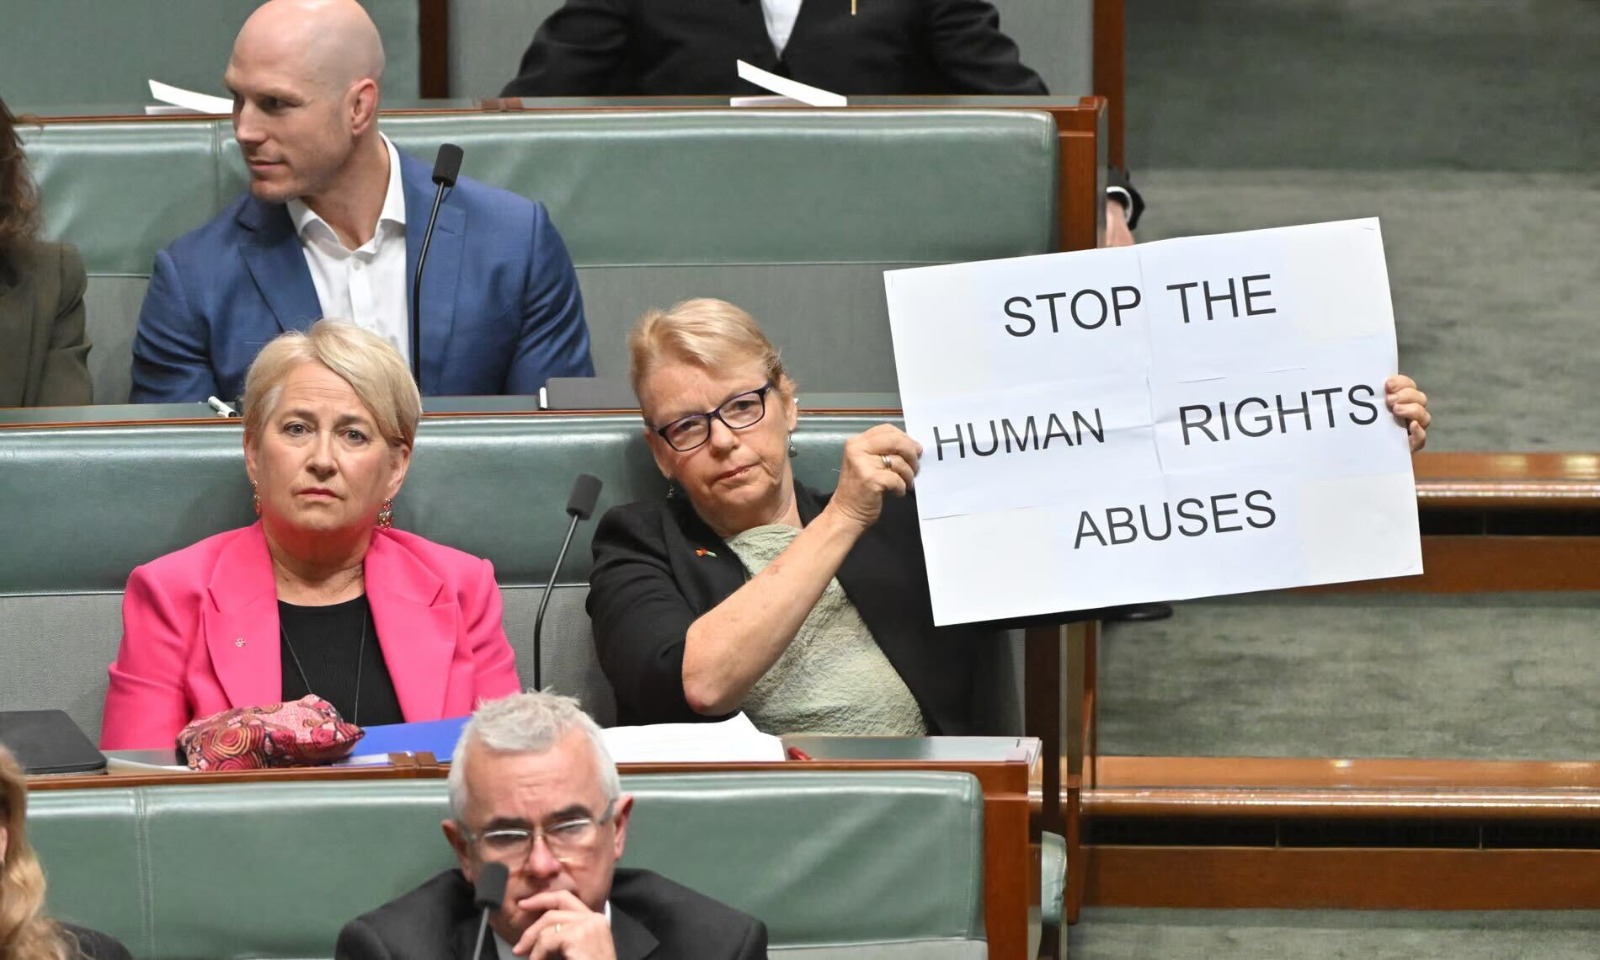 Australian senator Janet Rice, during President Ferdinand “Bongbong” Marcos Jr. 's address to the Australian Parliament on Thursday, pulls up a placard urging the president to “stop the human rights abuses."